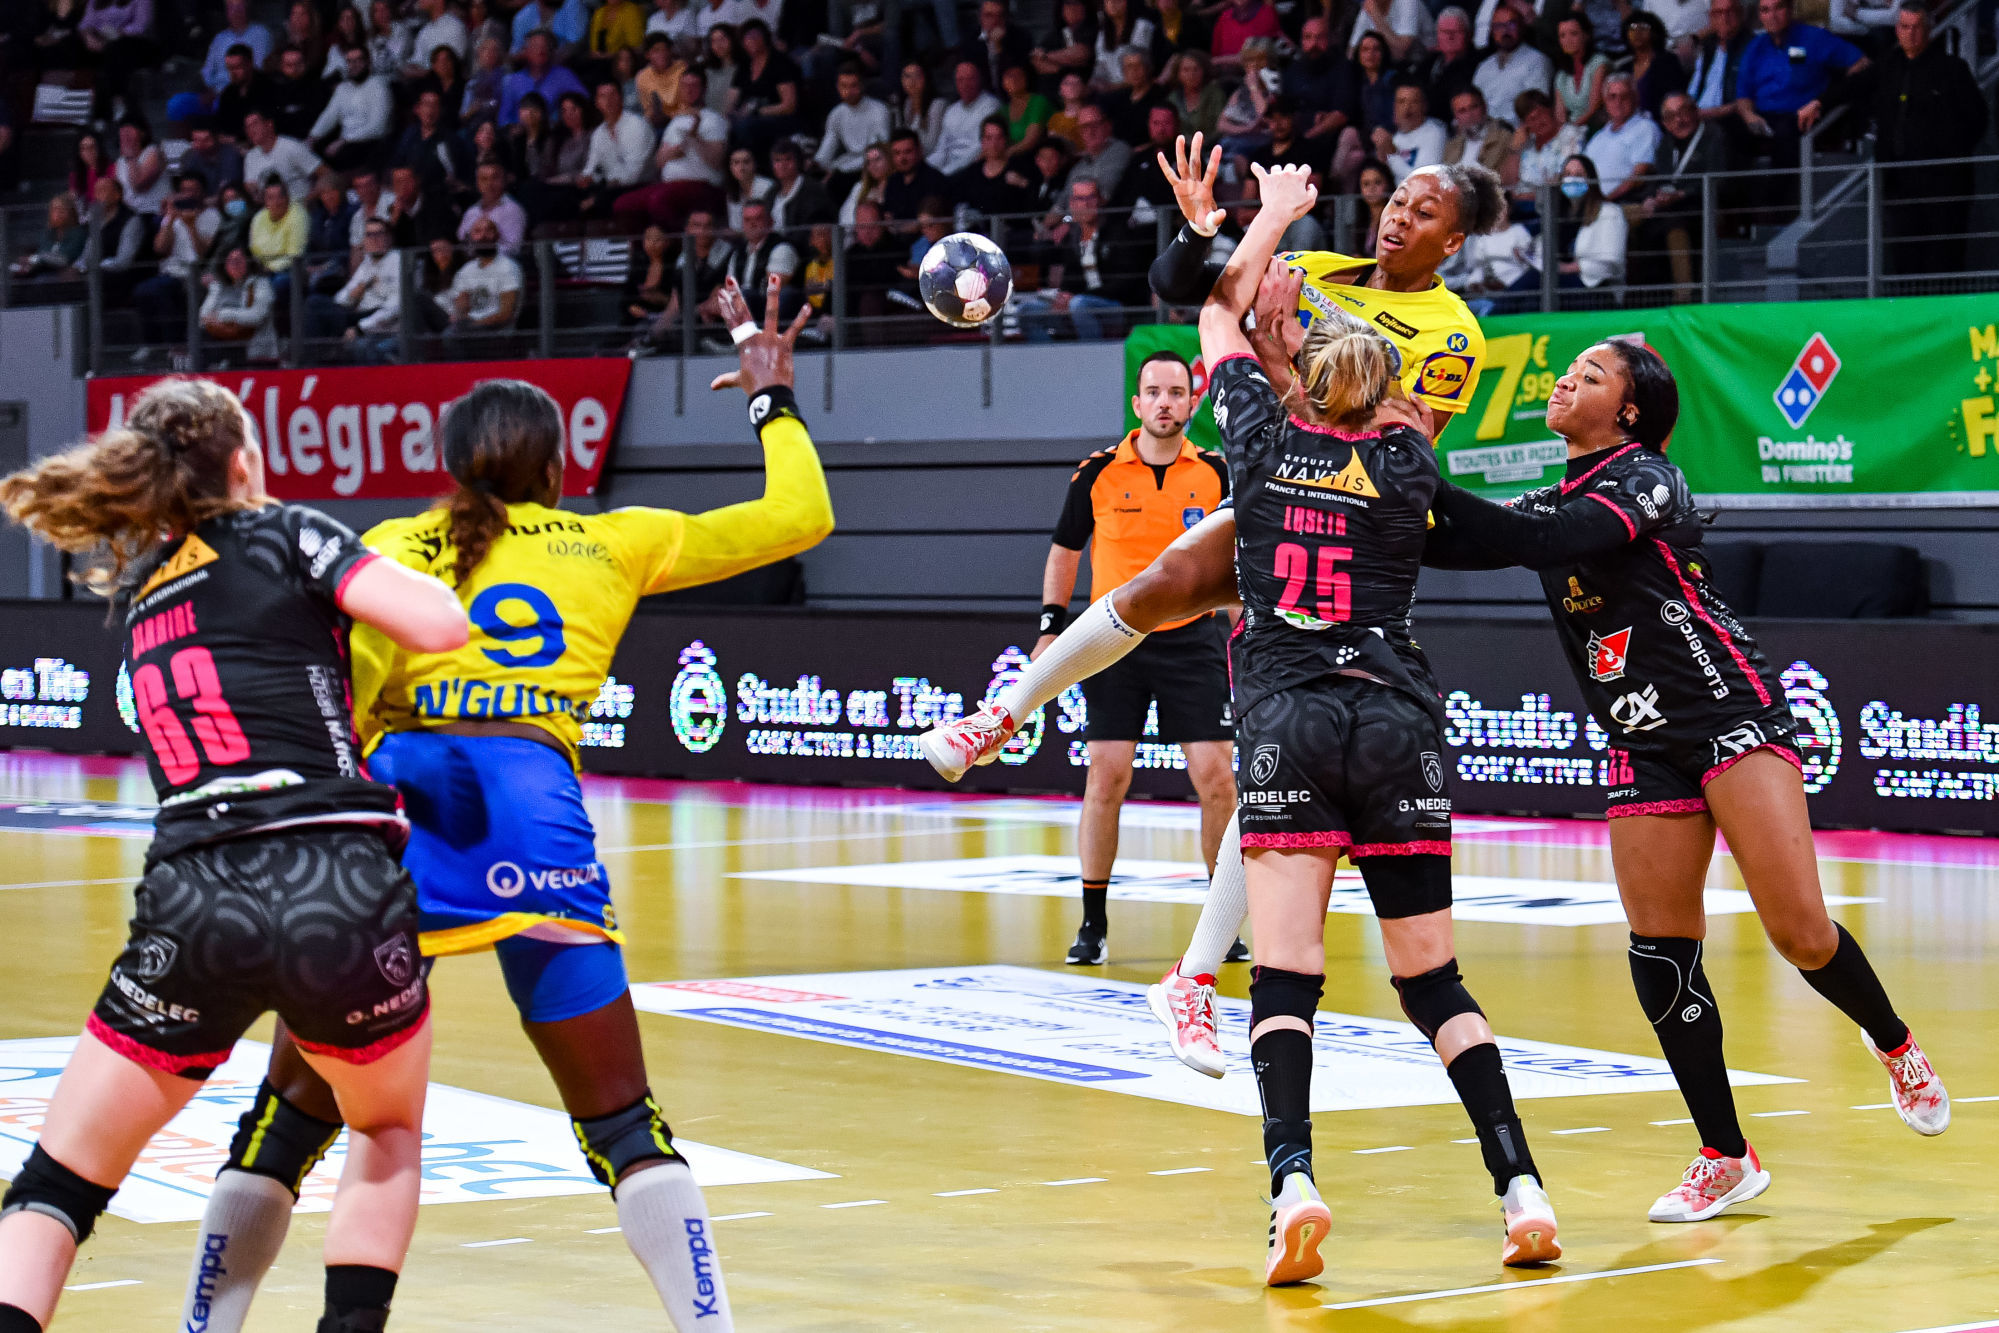 Orlane KANOR of Metz, Tonje LOSETH of Brest and Pauletta FOPPA of Brest  during the Final Ligue Butaguaz Energie match between Brest and Metz on May 26, 2022 in Brest, France. (Photo by Baptiste Fernandez/Icon Sport)